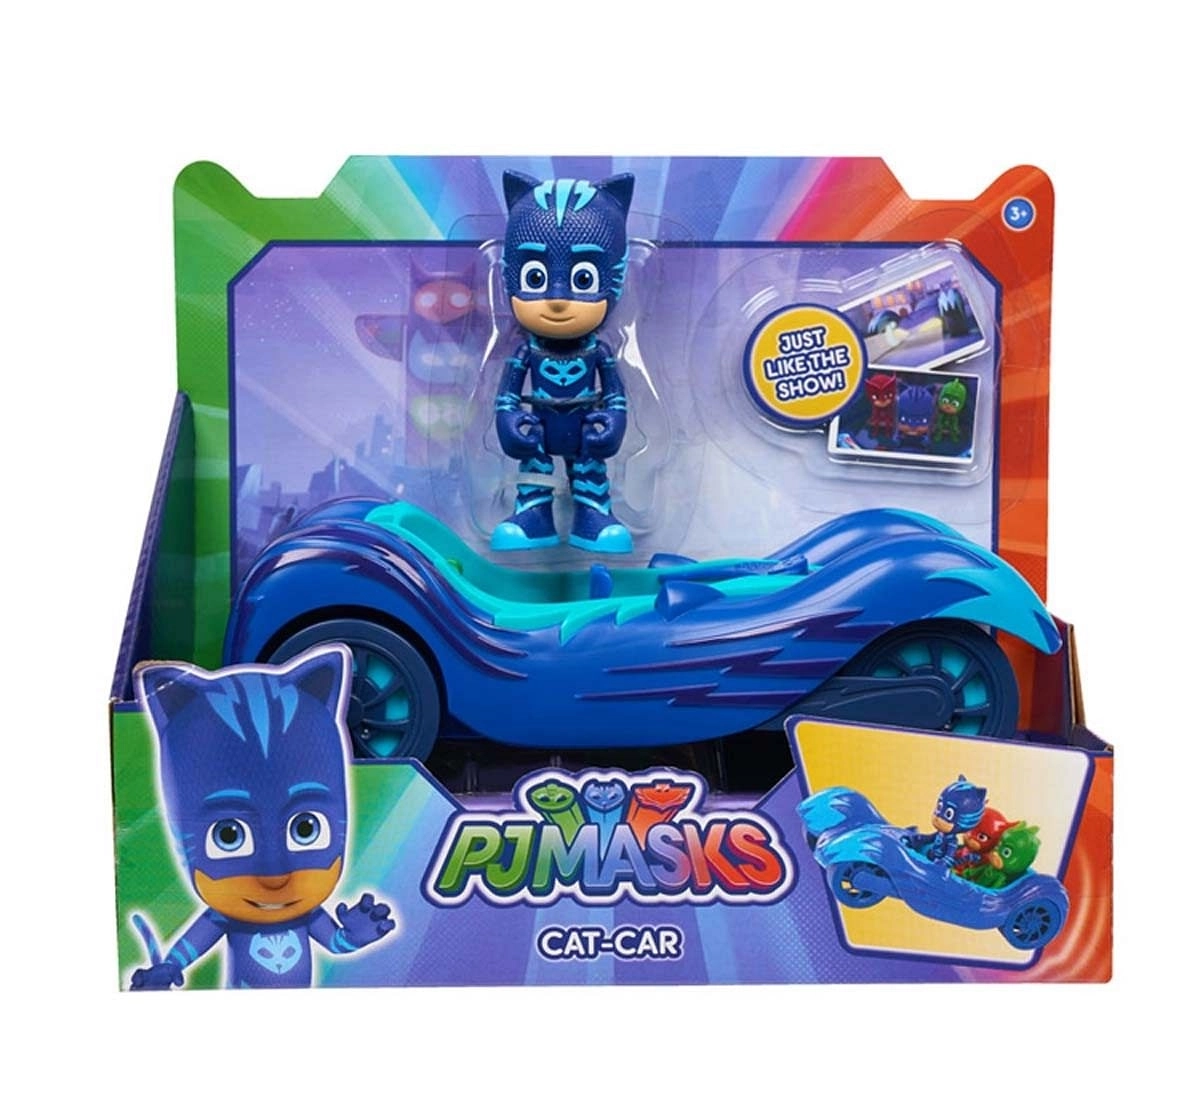 Pj Masks Vehicles Assorted Activity Toys for Kids Age 3Y+